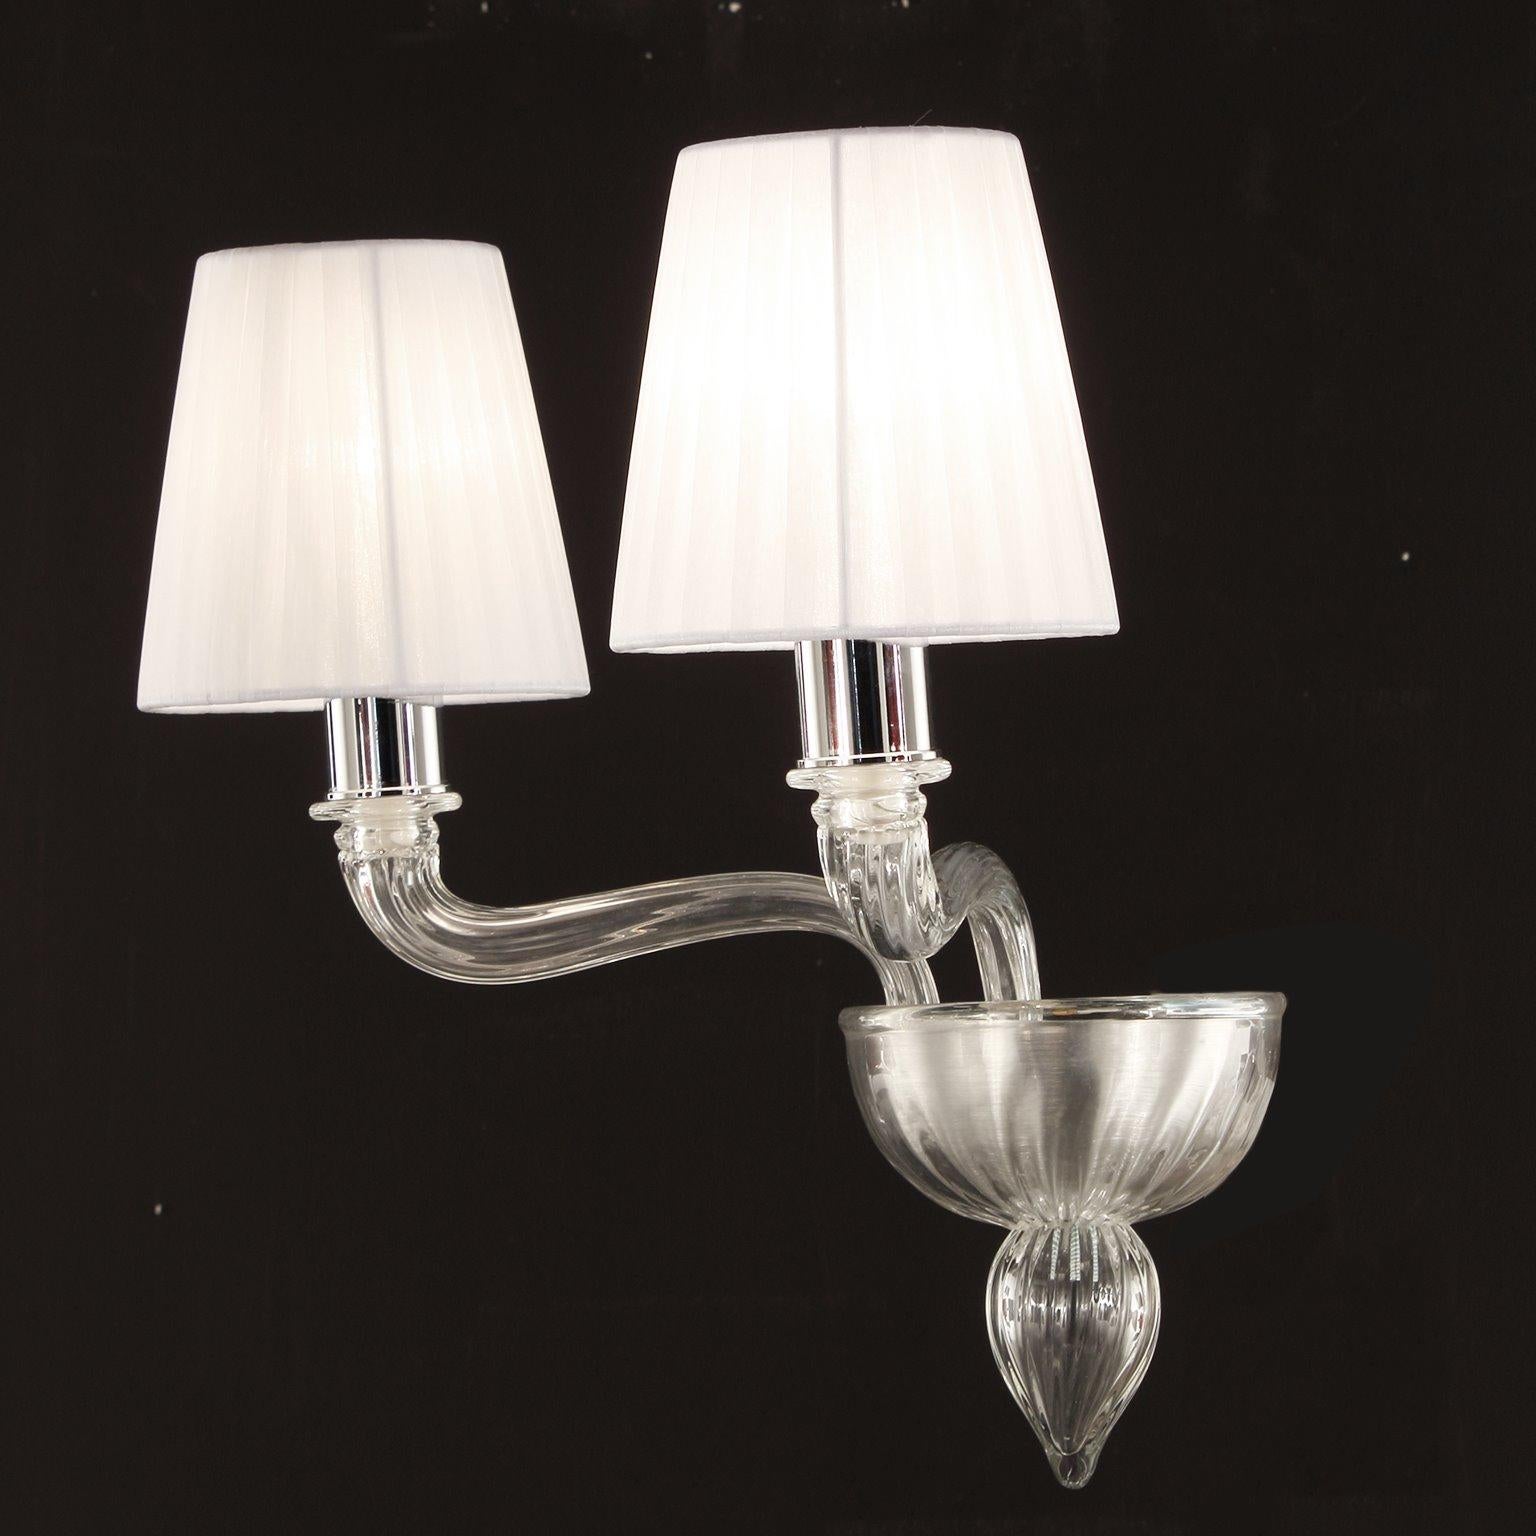 Sconce 2 Arms Clear Murano Glass, White Organza Lampshades by Multiforme In New Condition For Sale In Trebaseleghe, IT